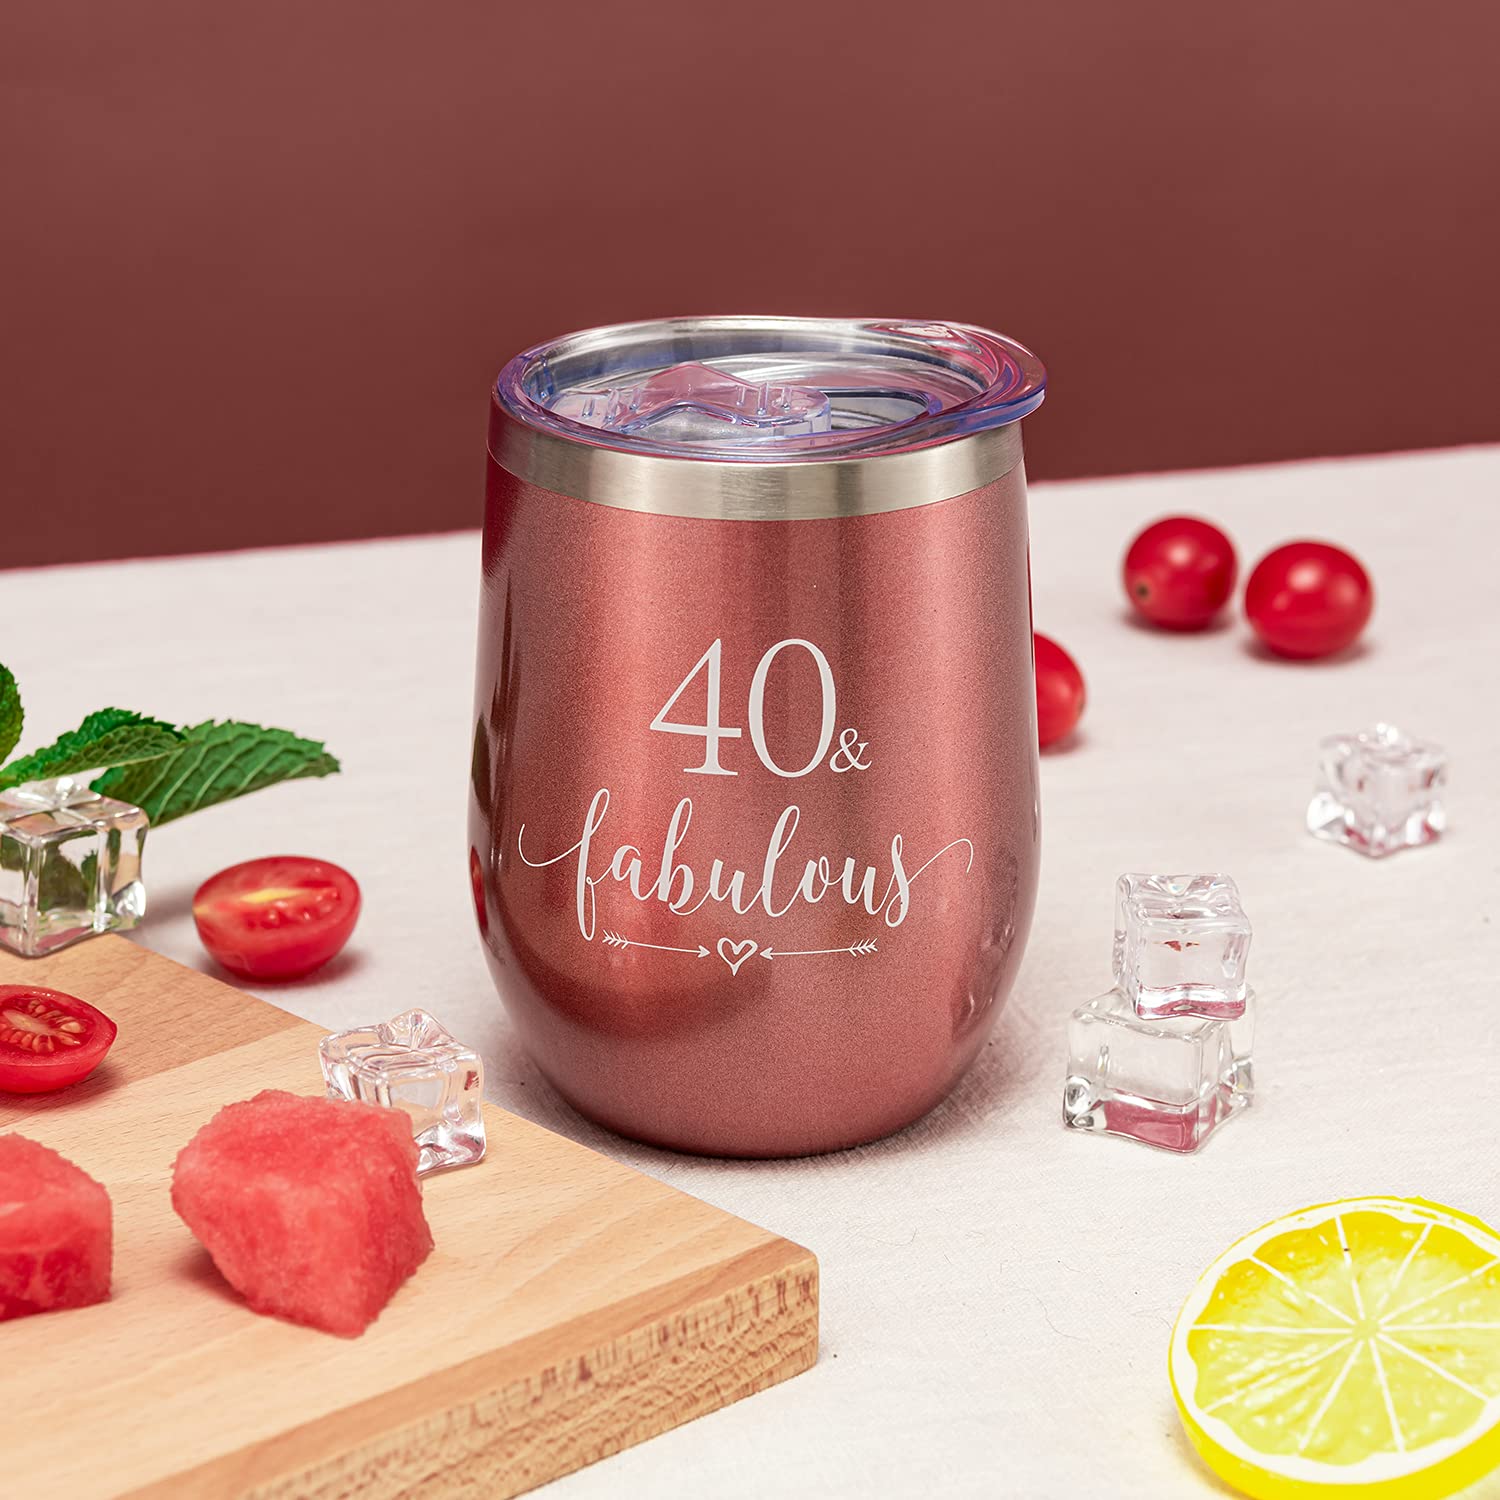 Crisky Rose Gold 40 & Fabulous Wine Tumbler for Women 40th Birthday Gifts for Women, Wife, Mom, Sister, Aunt, Friends, Coworker Her, Vacuum Insulated Coffee Cup,12oz with Box, Lid, Straw